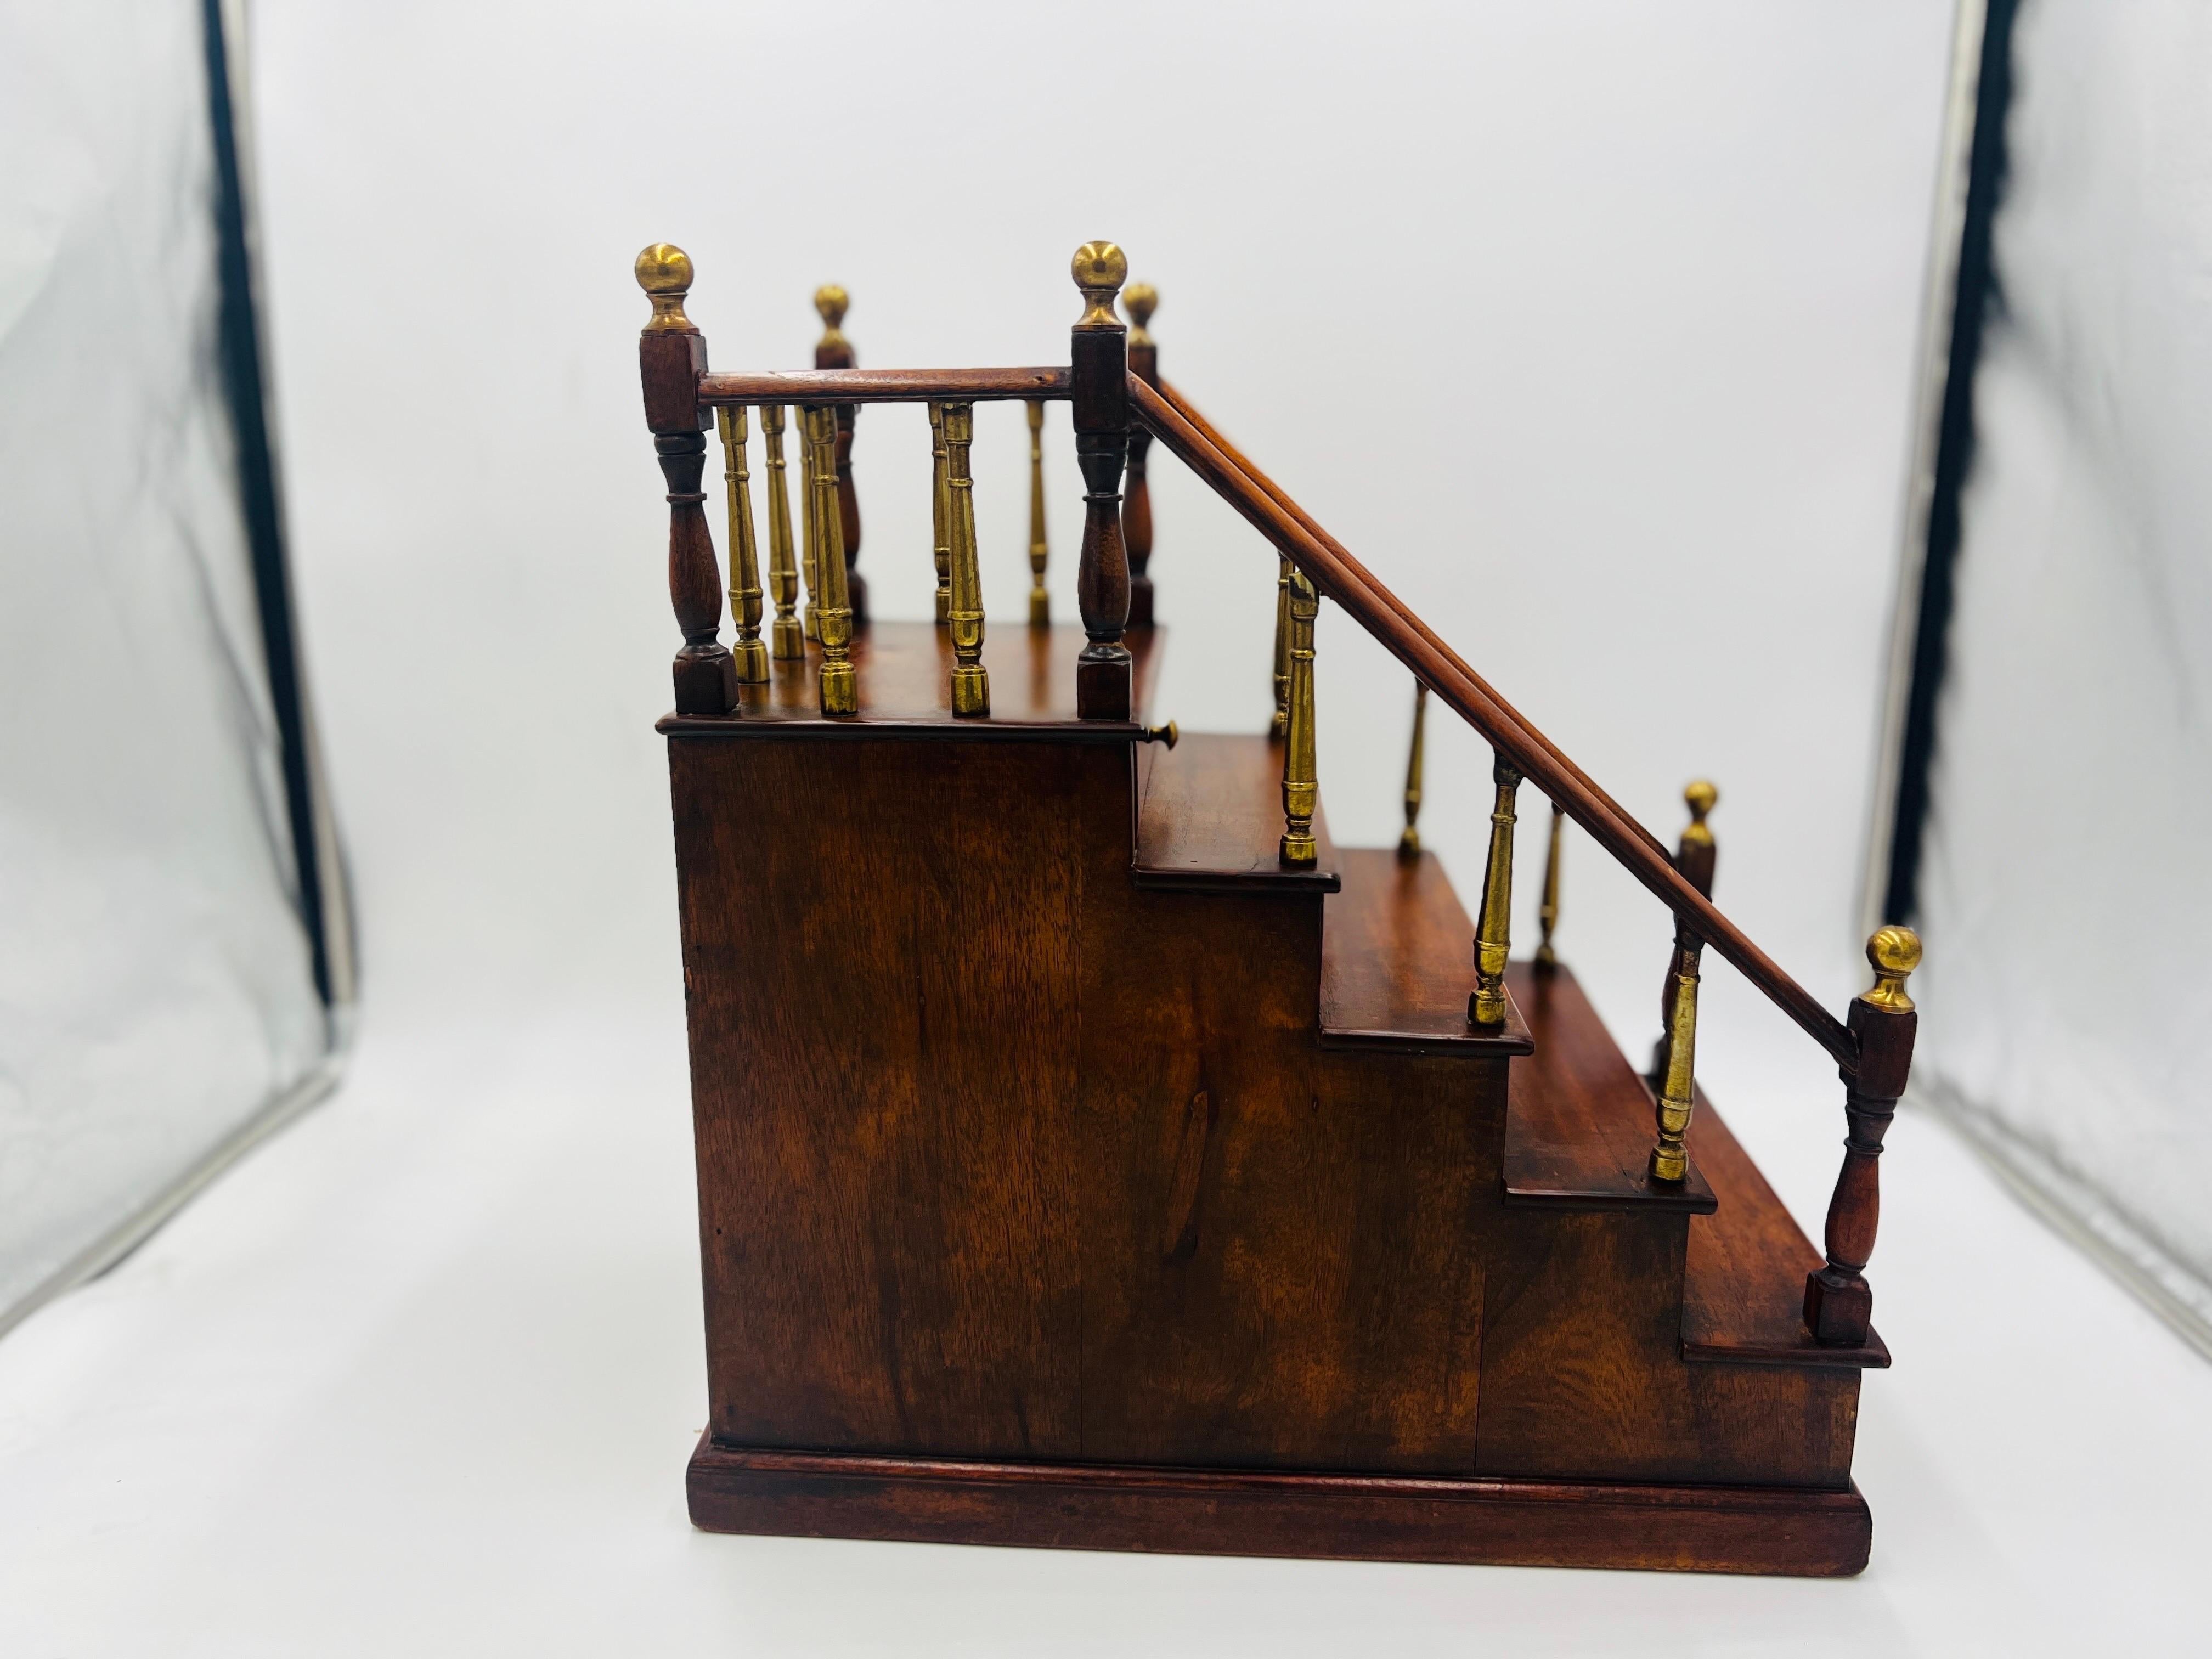 Antique Edwardian Mahogany Staircase Model with Brass Finial Newel Posts For Sale 3